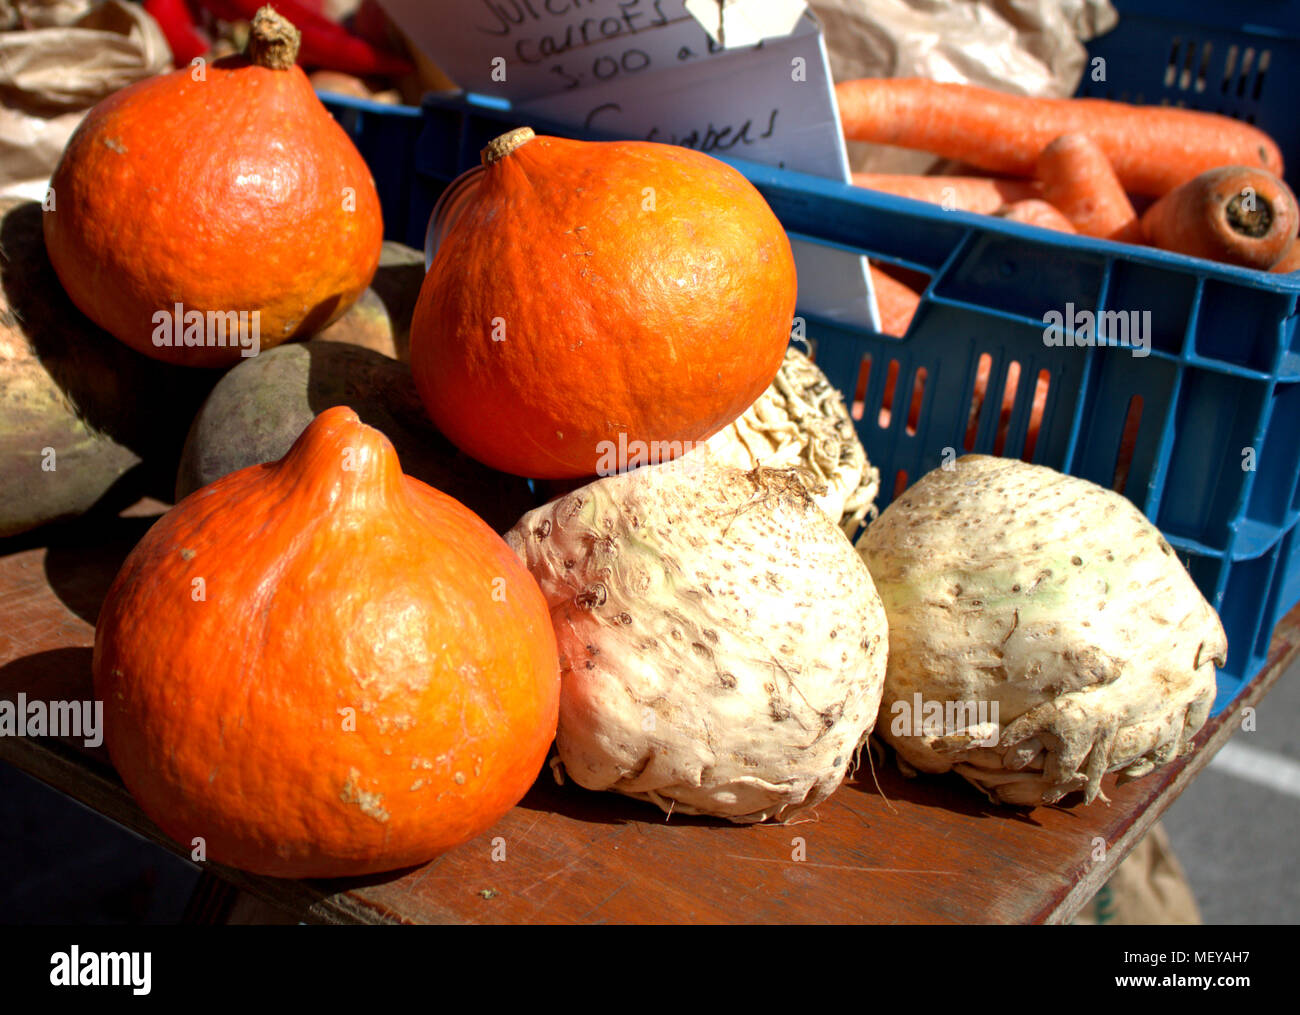 squashes and celeriac, part of a fresh vegetable display on sale at a weekly food market or farmers market. Skibbereen, ireland a popular market place. Stock Photo